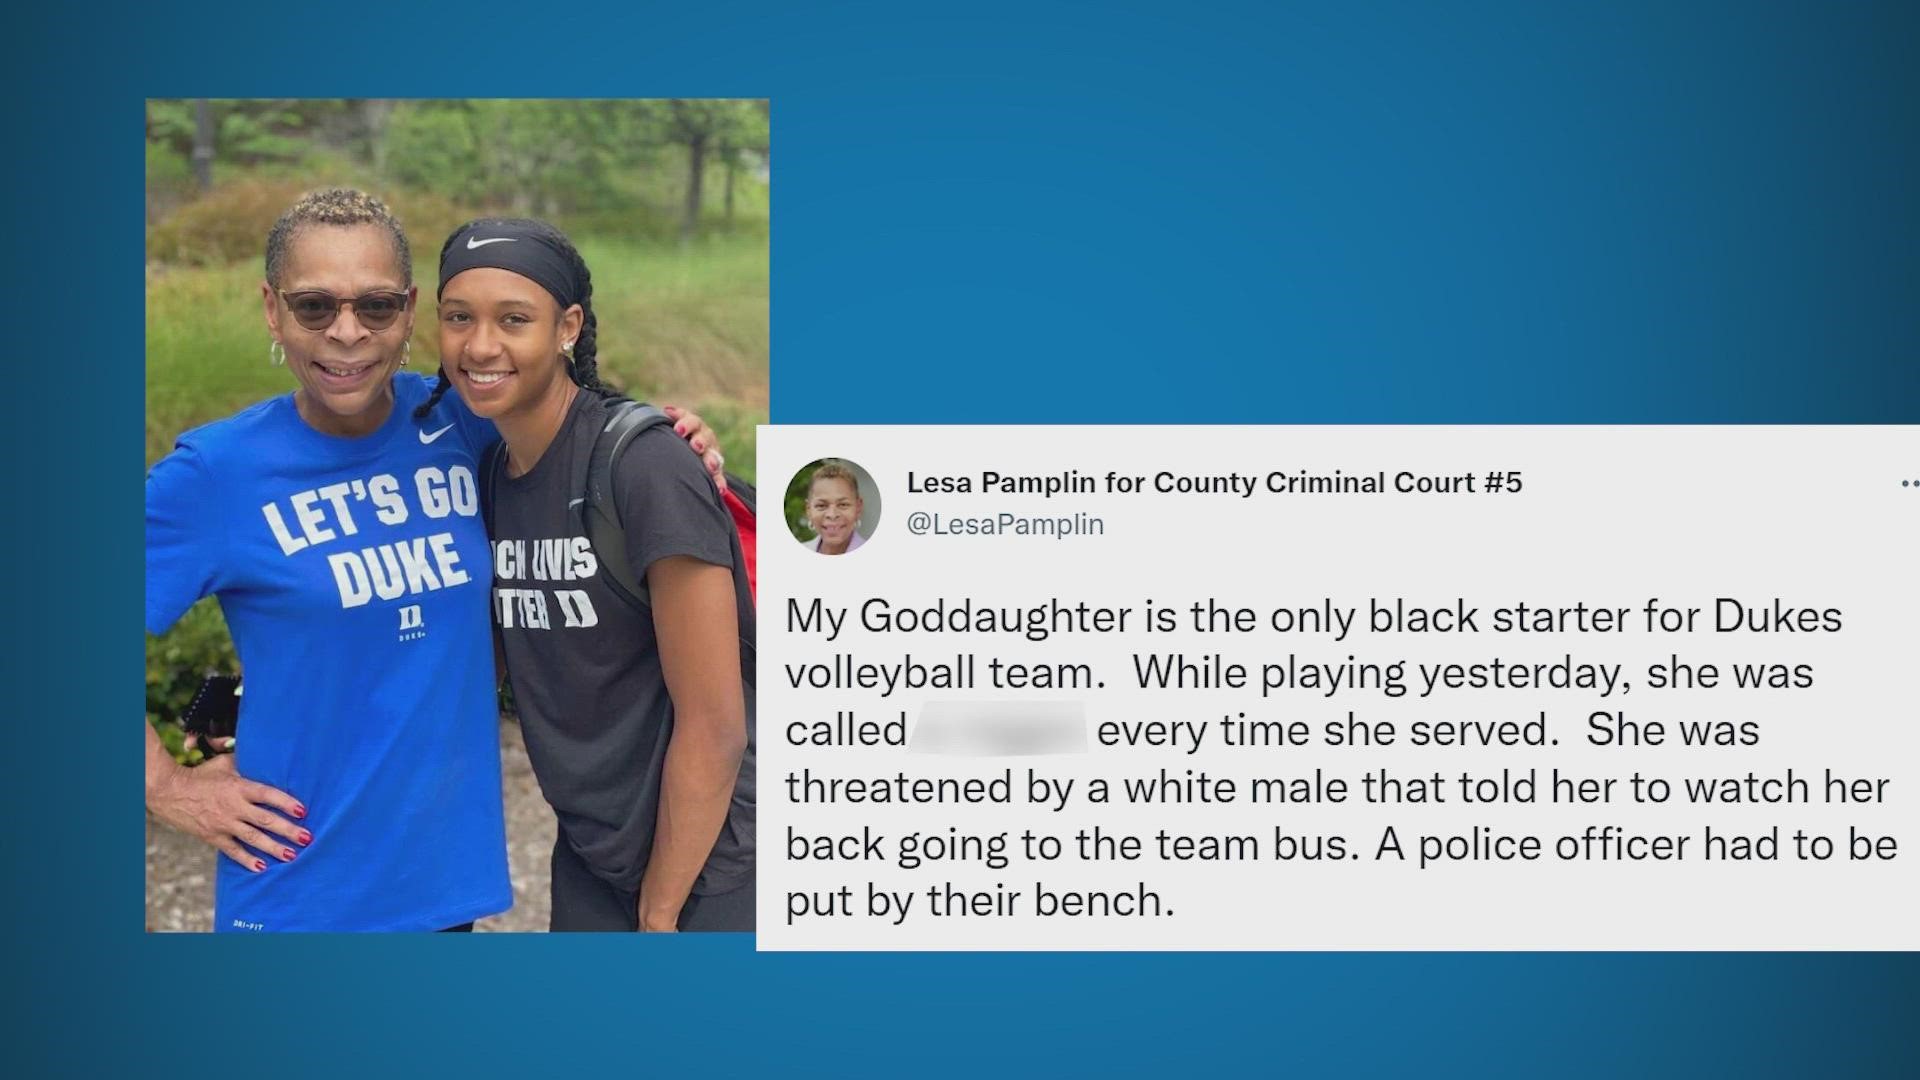 Brigham Young University banned a fan after an incident of racism at a volleyball game against Duke University went viral.